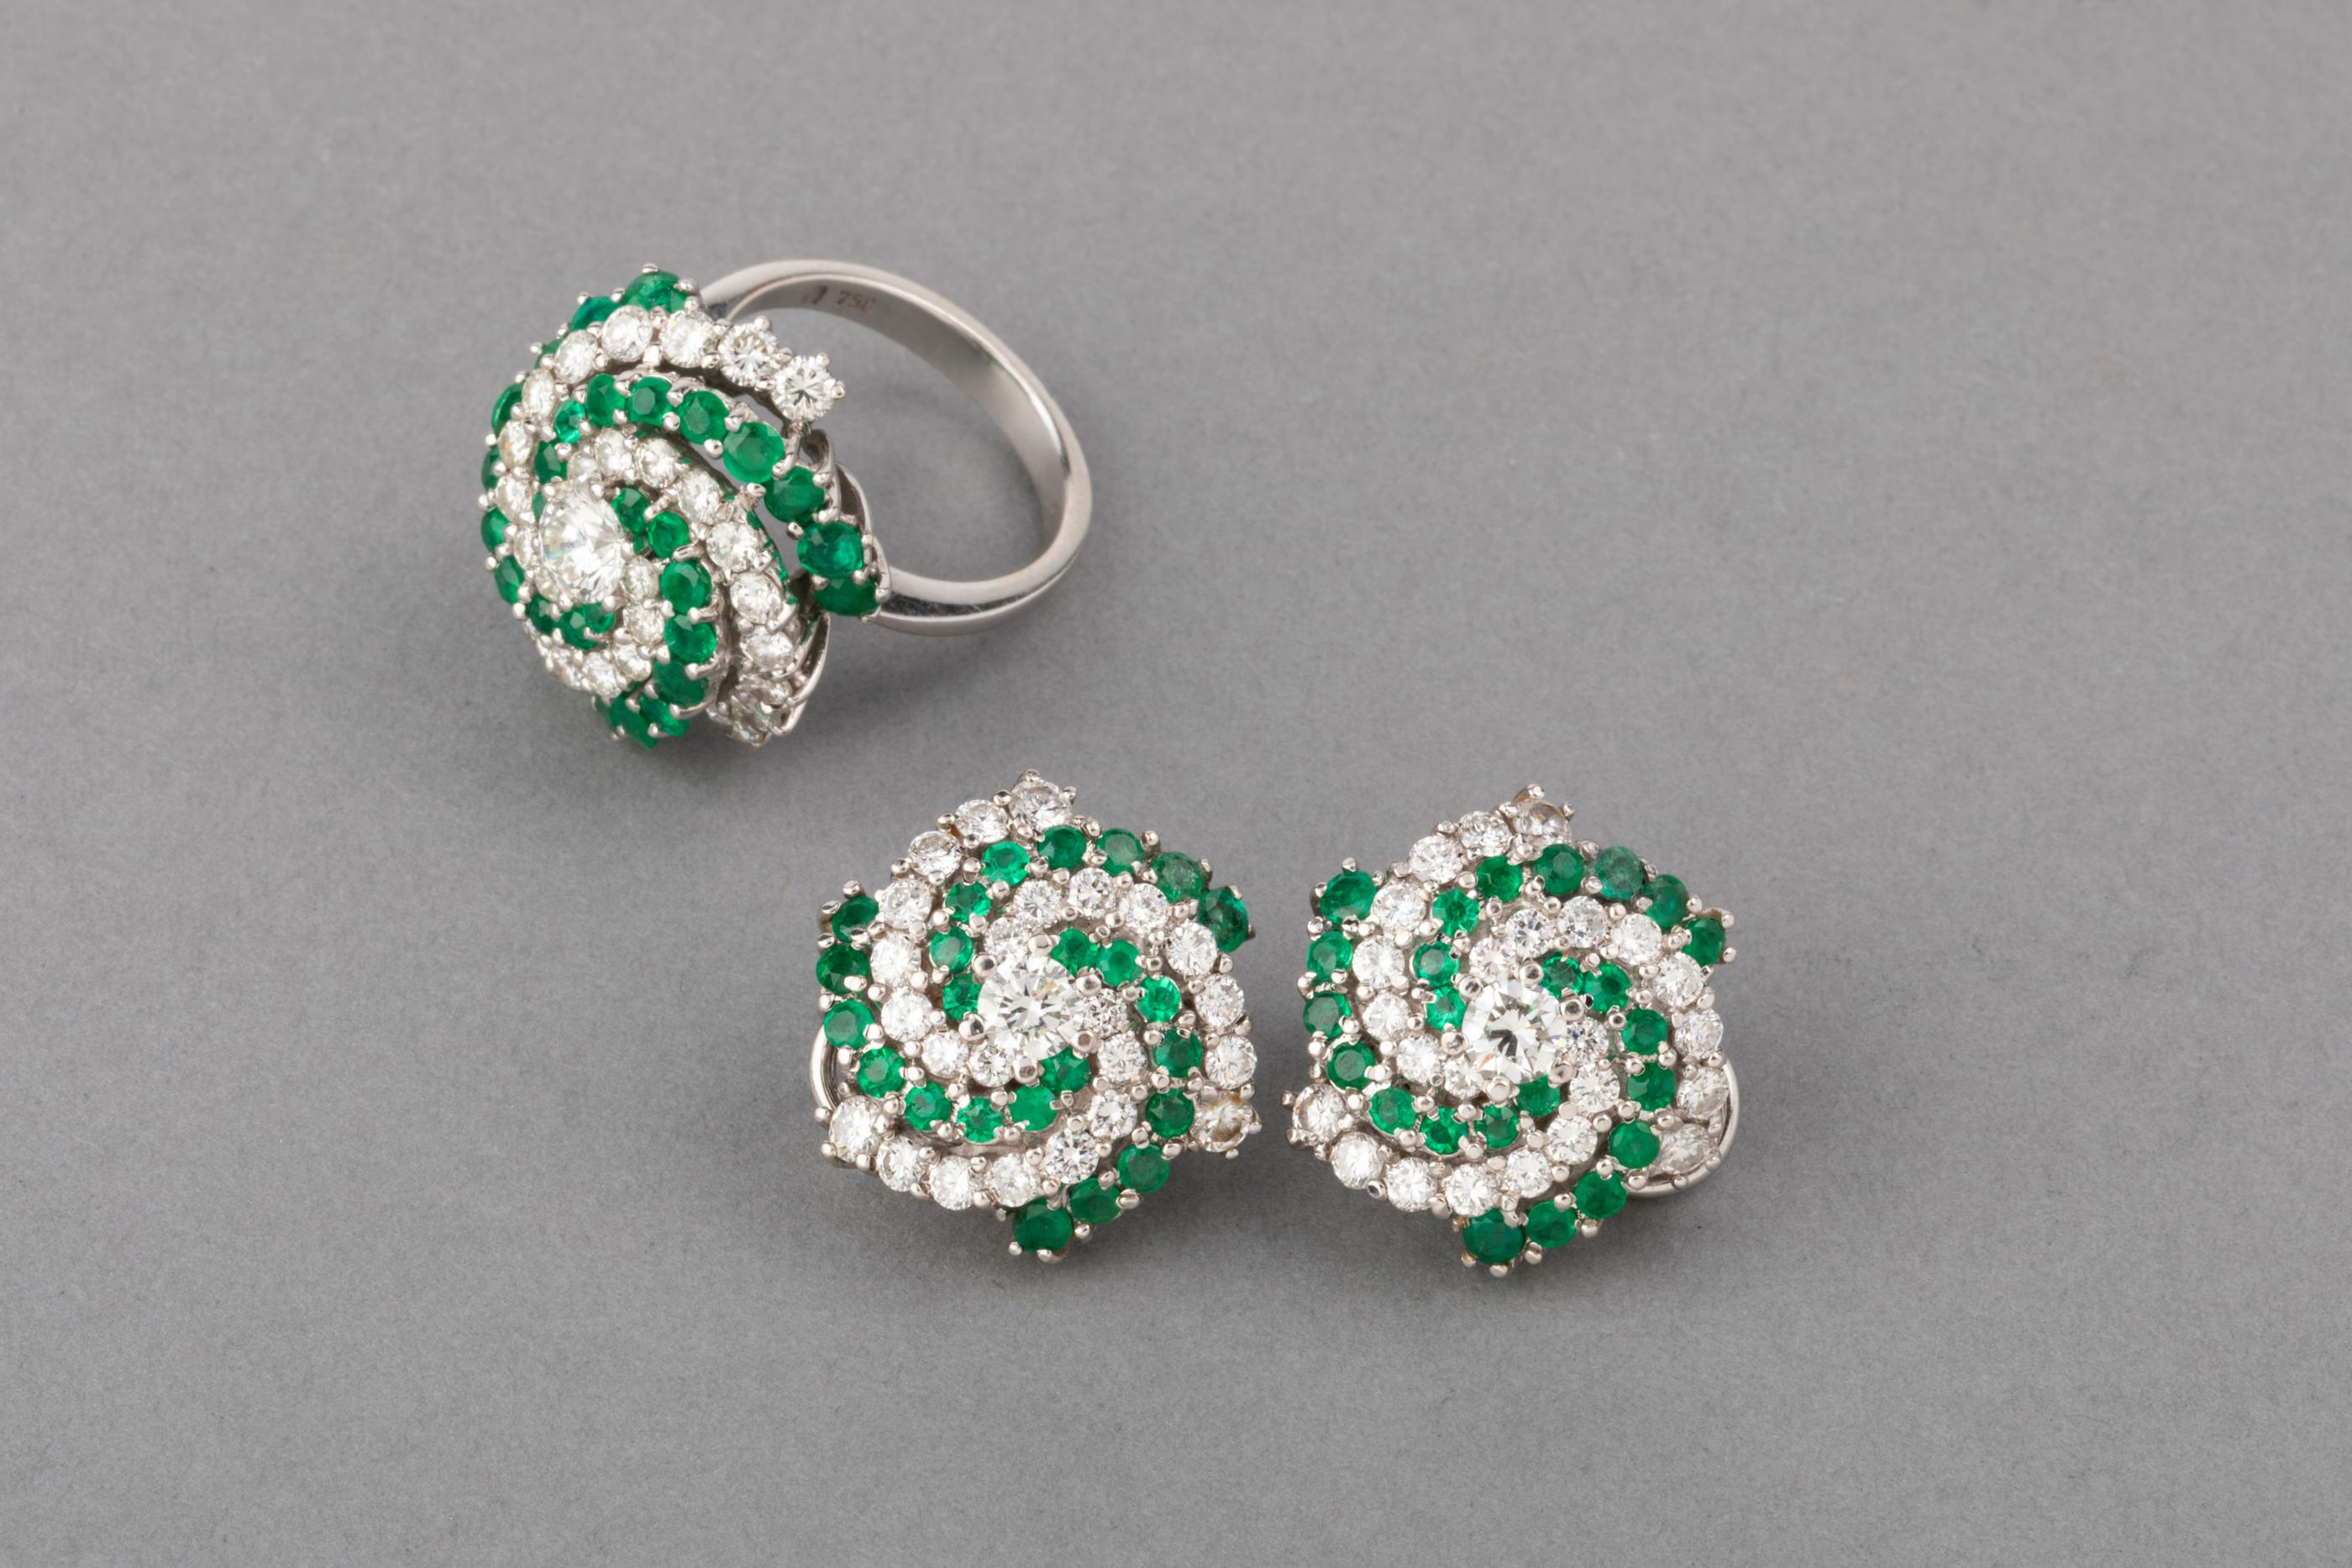 5 Carat Diamonds and 4 Carat Emeralds Ring and Earrings Set 4